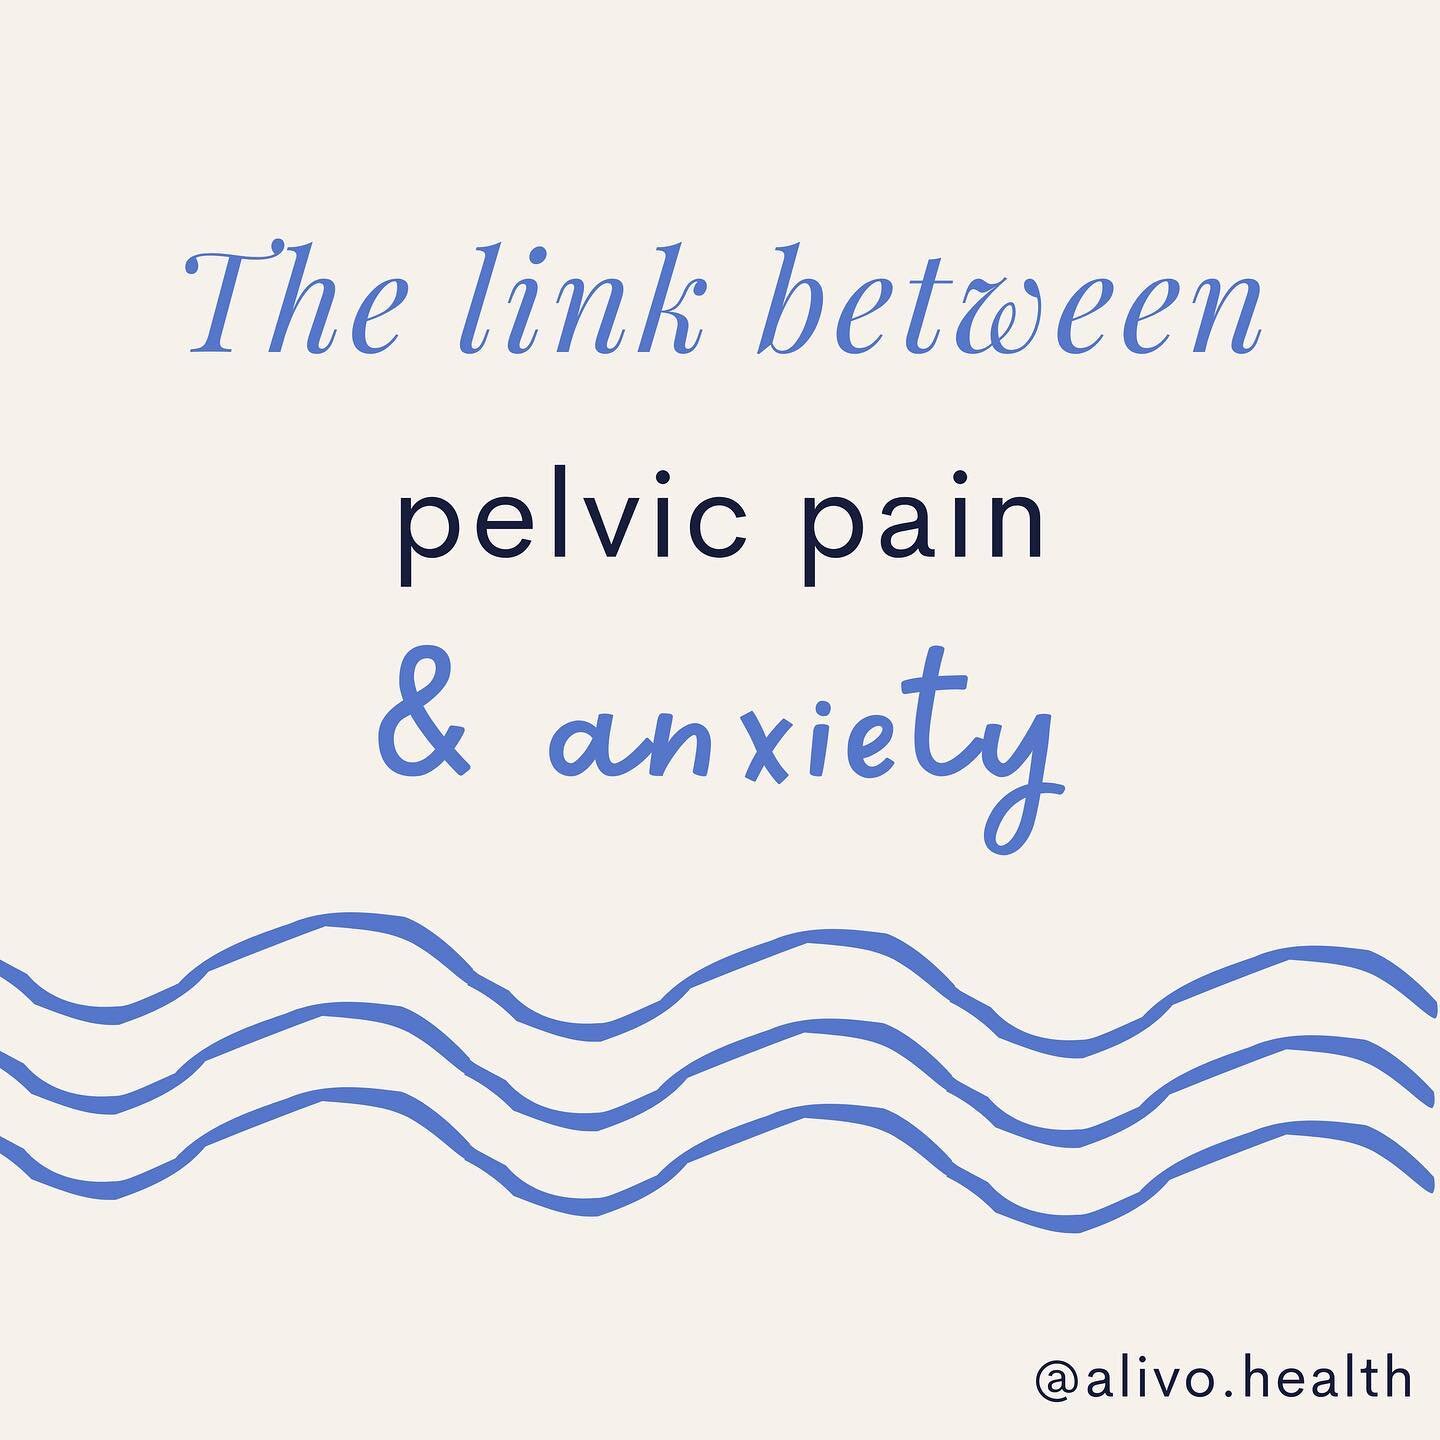 Does pain affect anxiety levels or do anxiety levels affect pain?